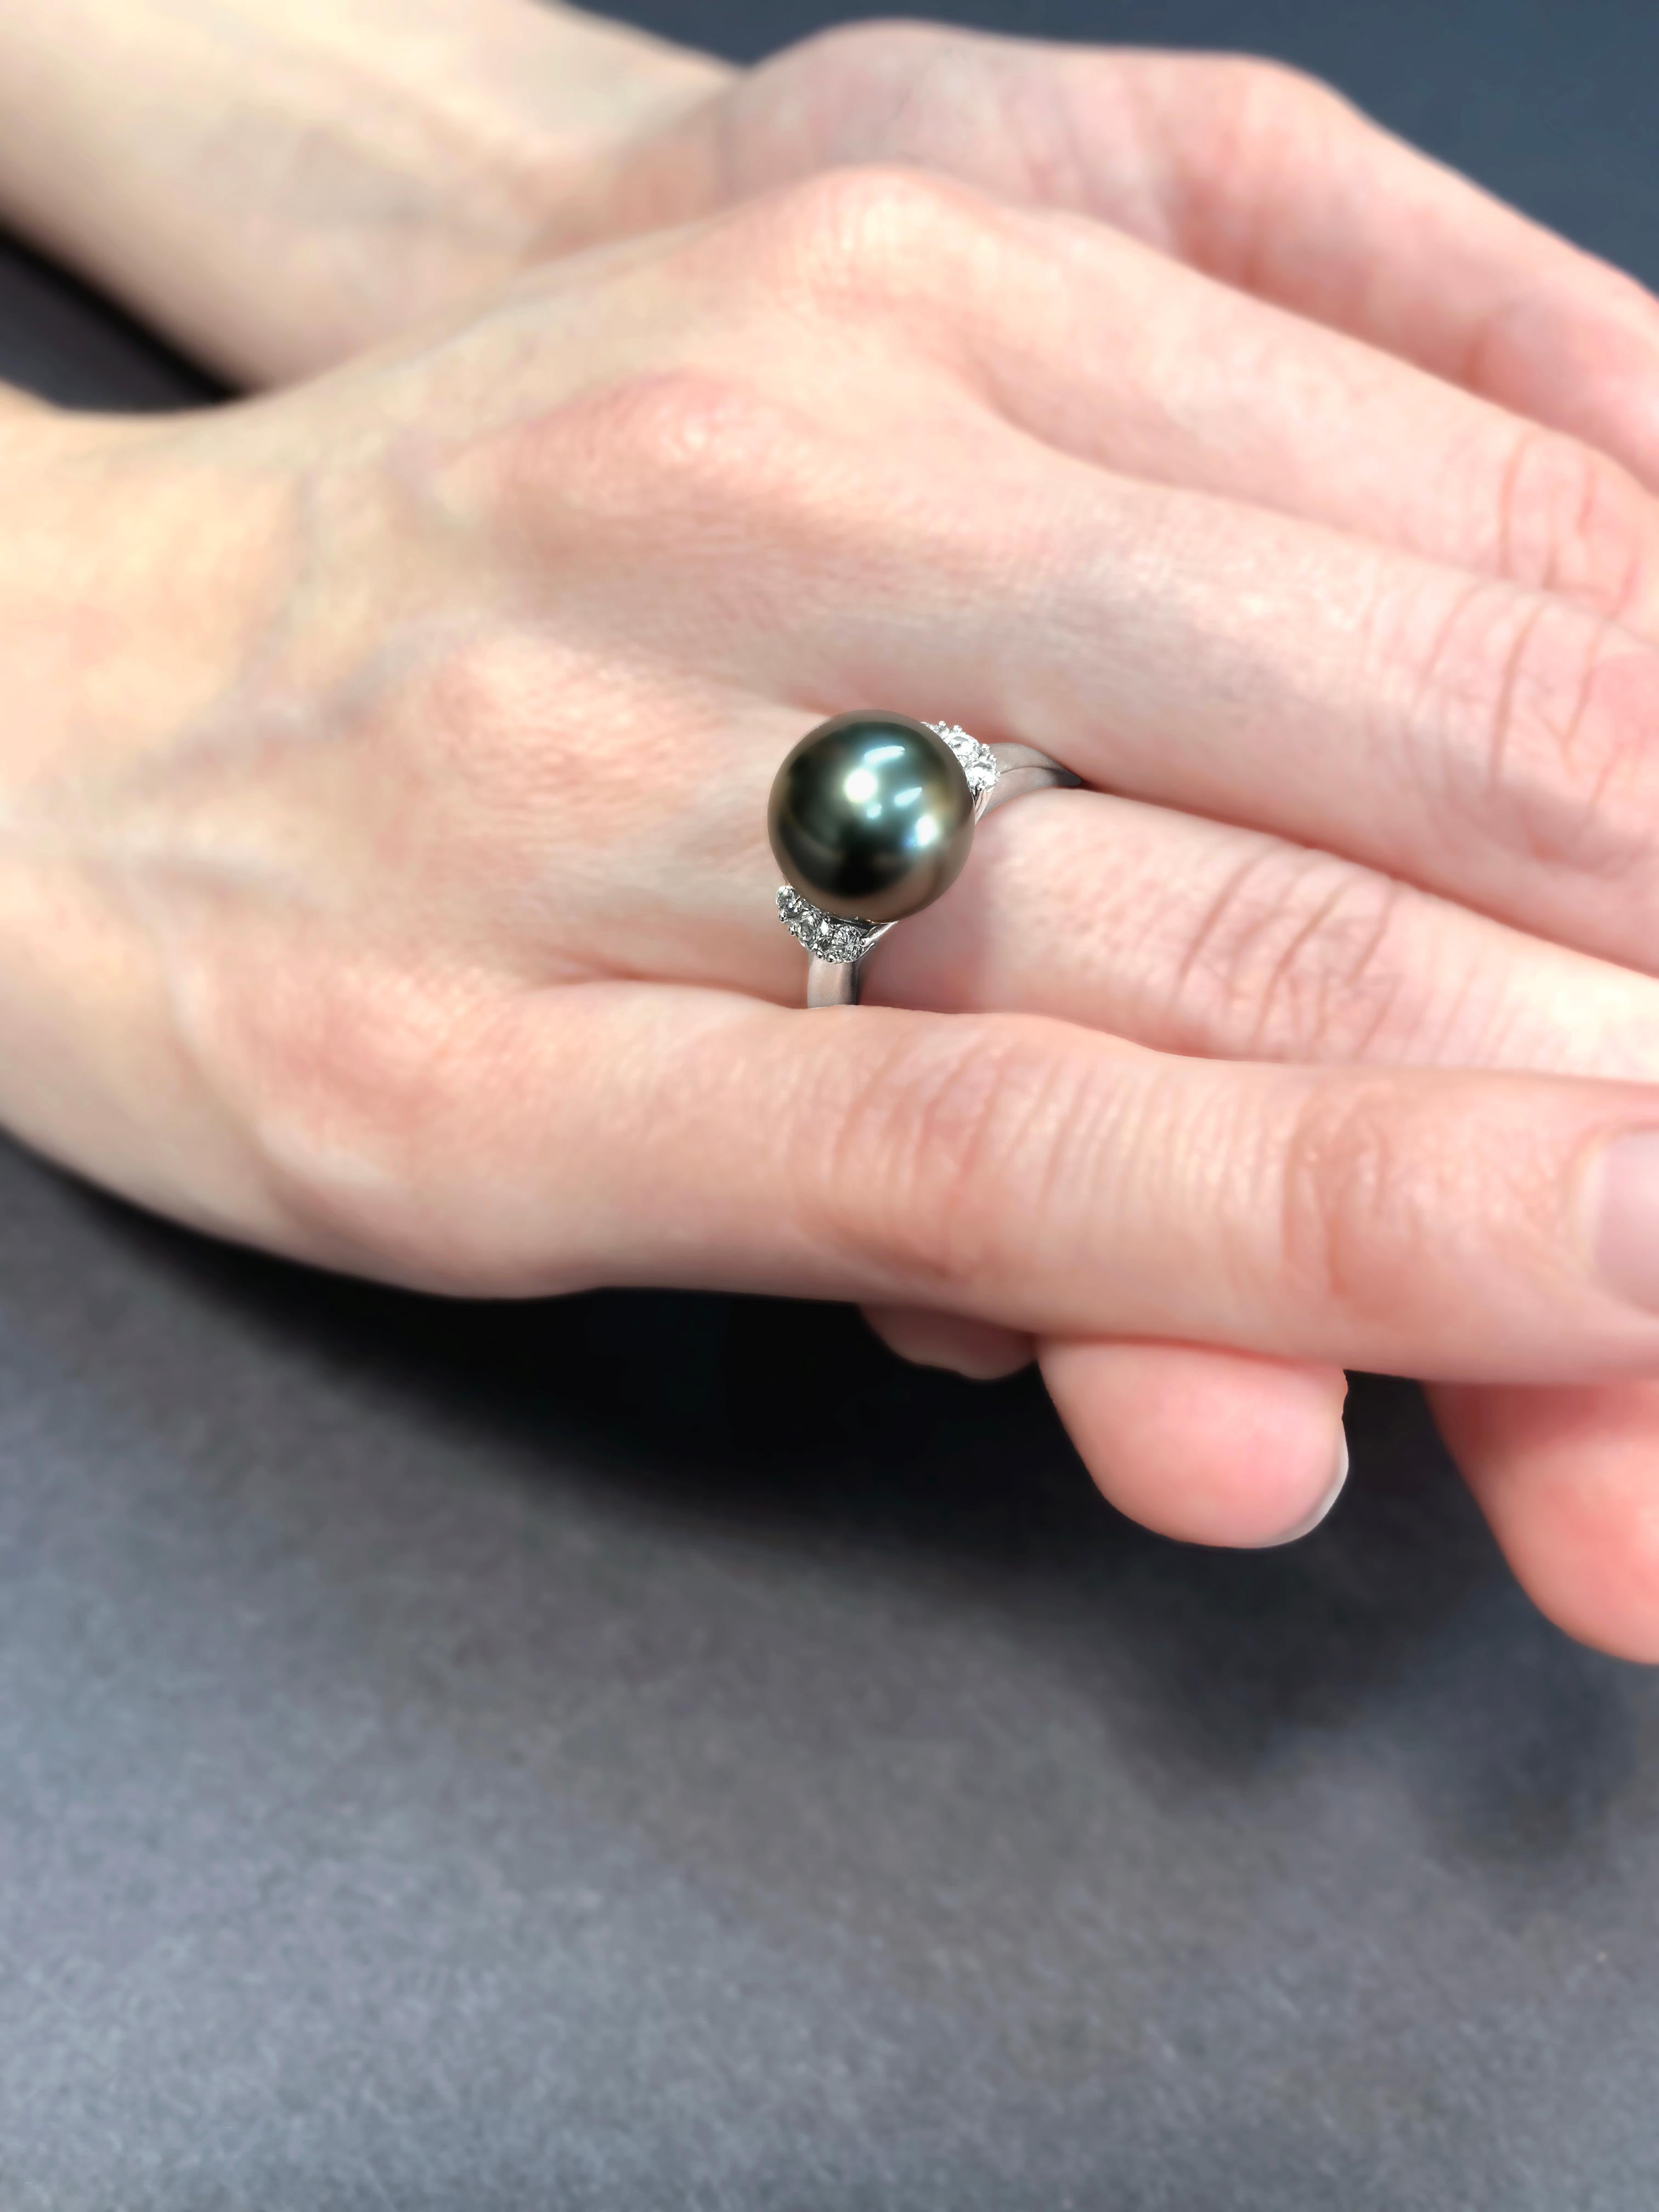 This delicate ring by Yoko London features a lustrous Tahitian pearl at the forefront of its design. Perfectly accentuated by diamonds and a white gold setting, this elegant design will make a spectacular addition to anyone’s jewellery box.